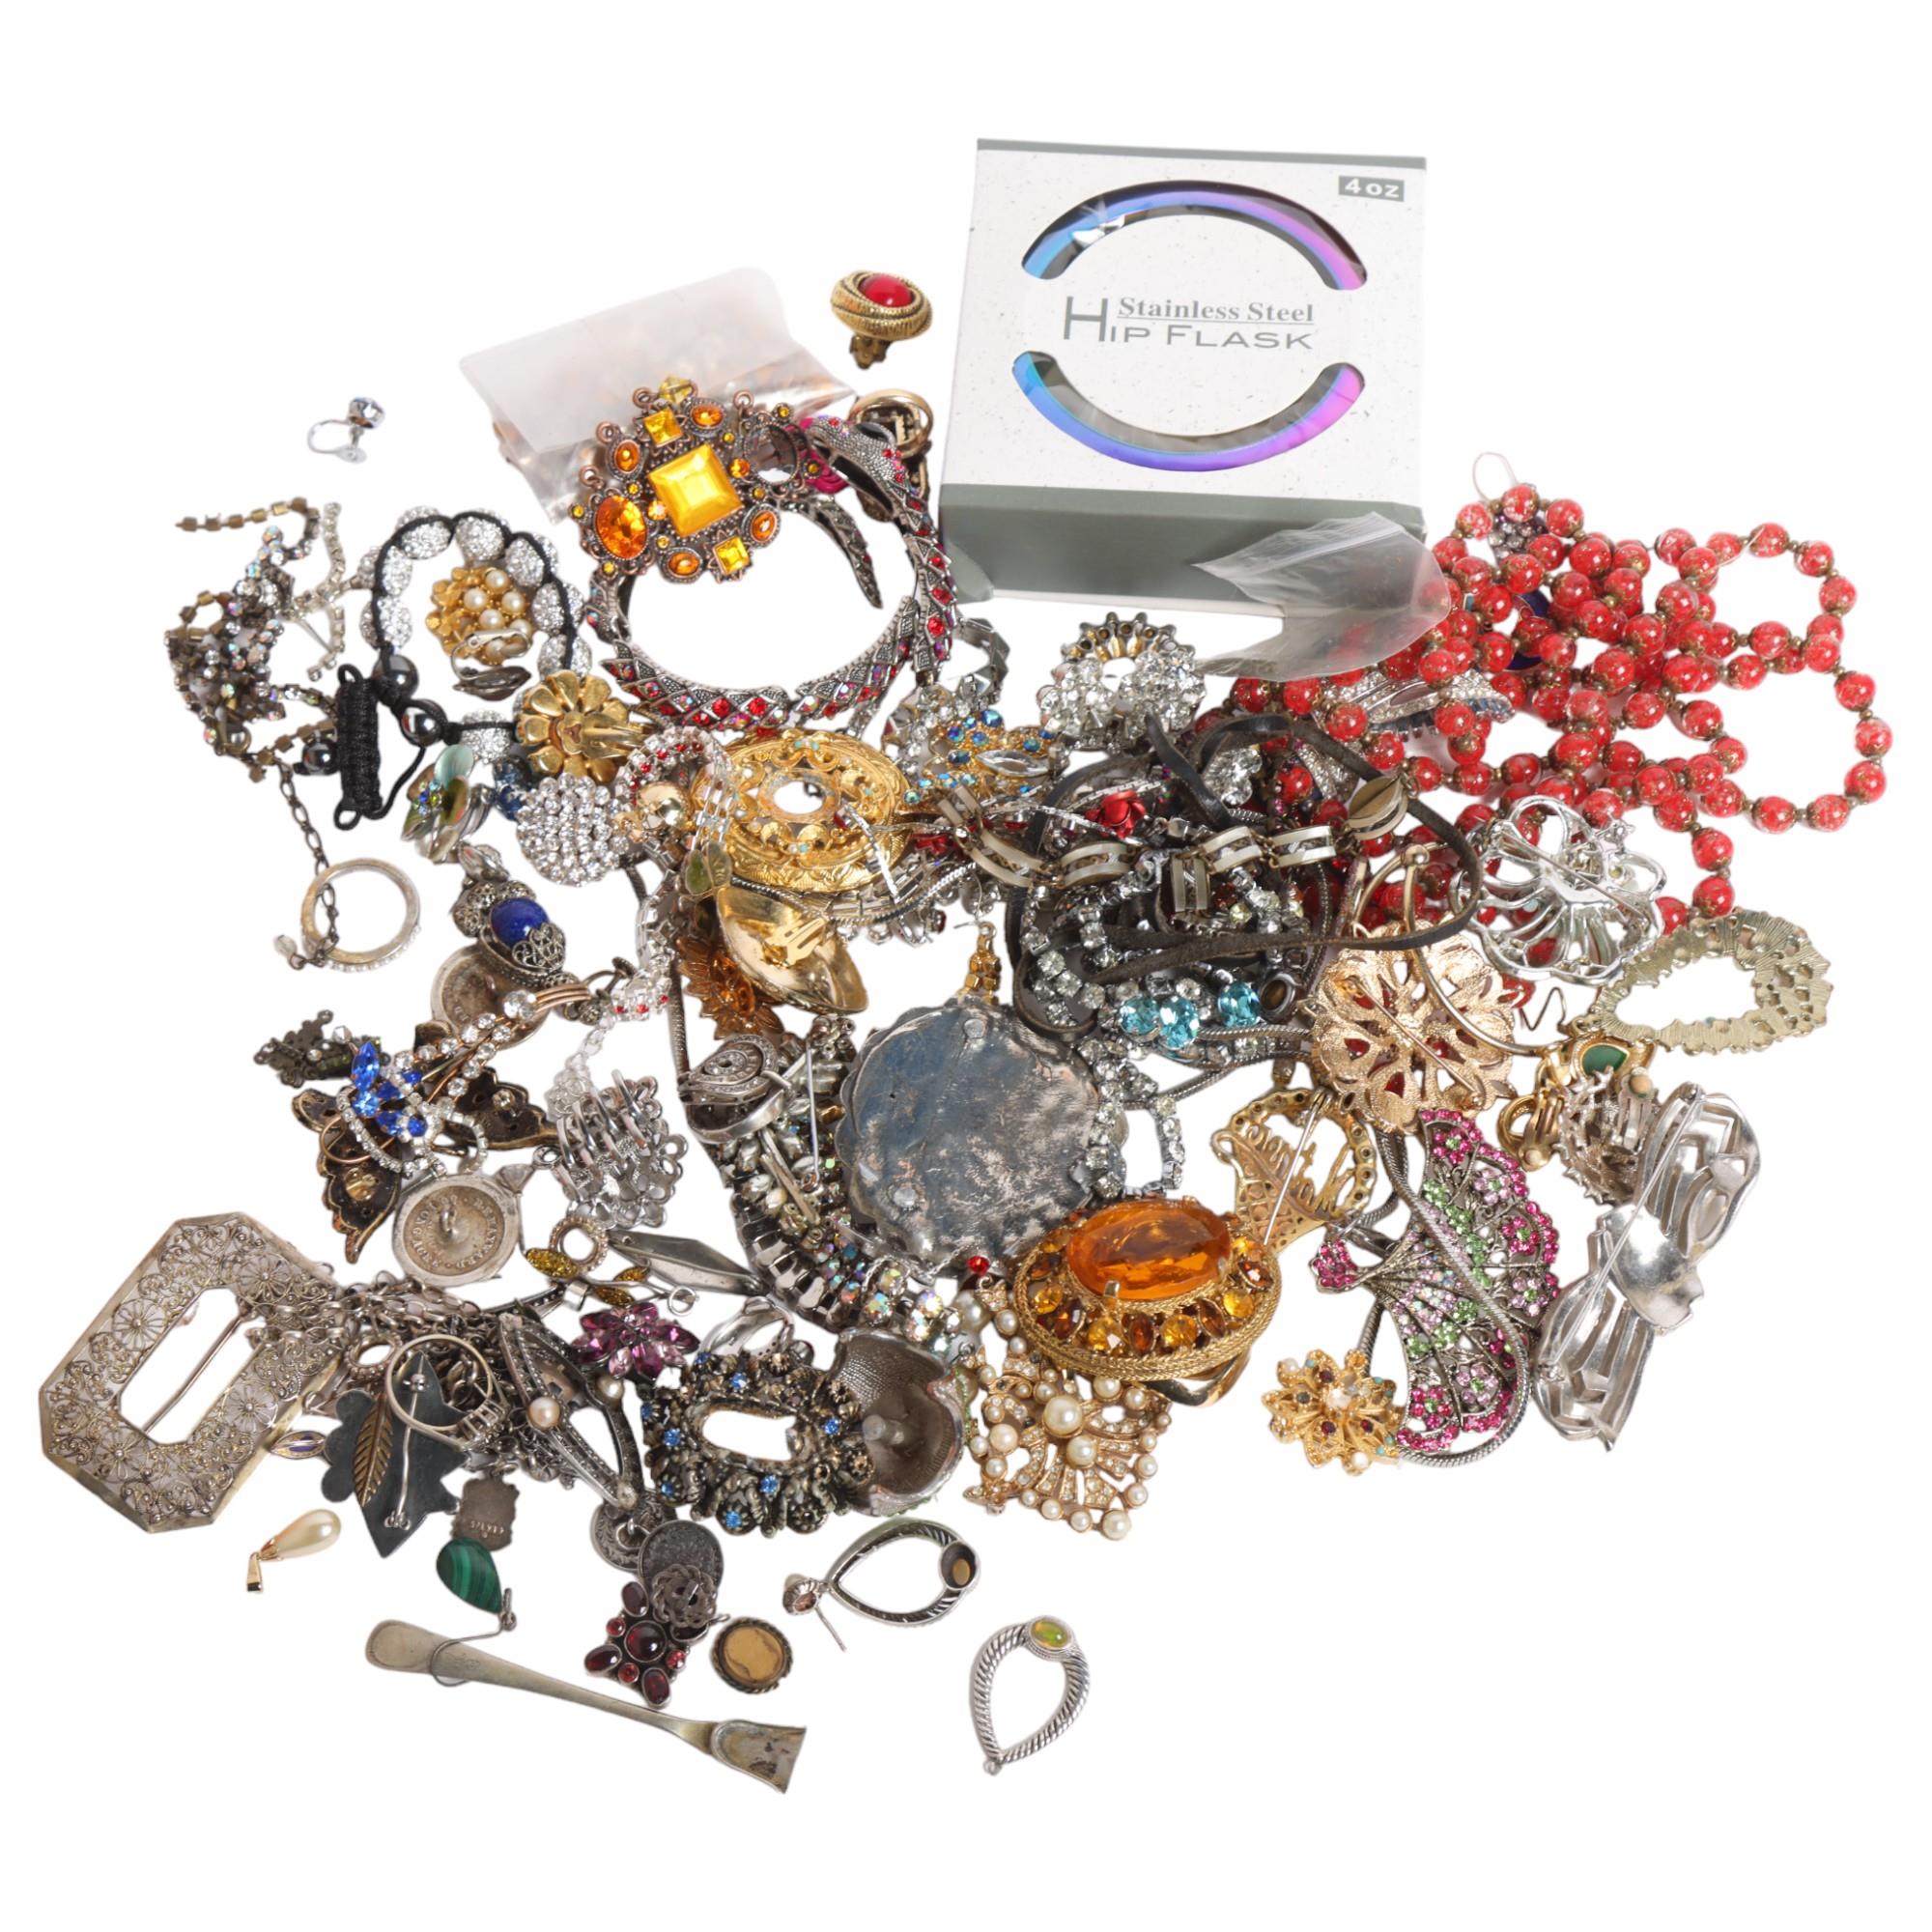 A box of various costume earrings, brooches, necklaces, including some silver